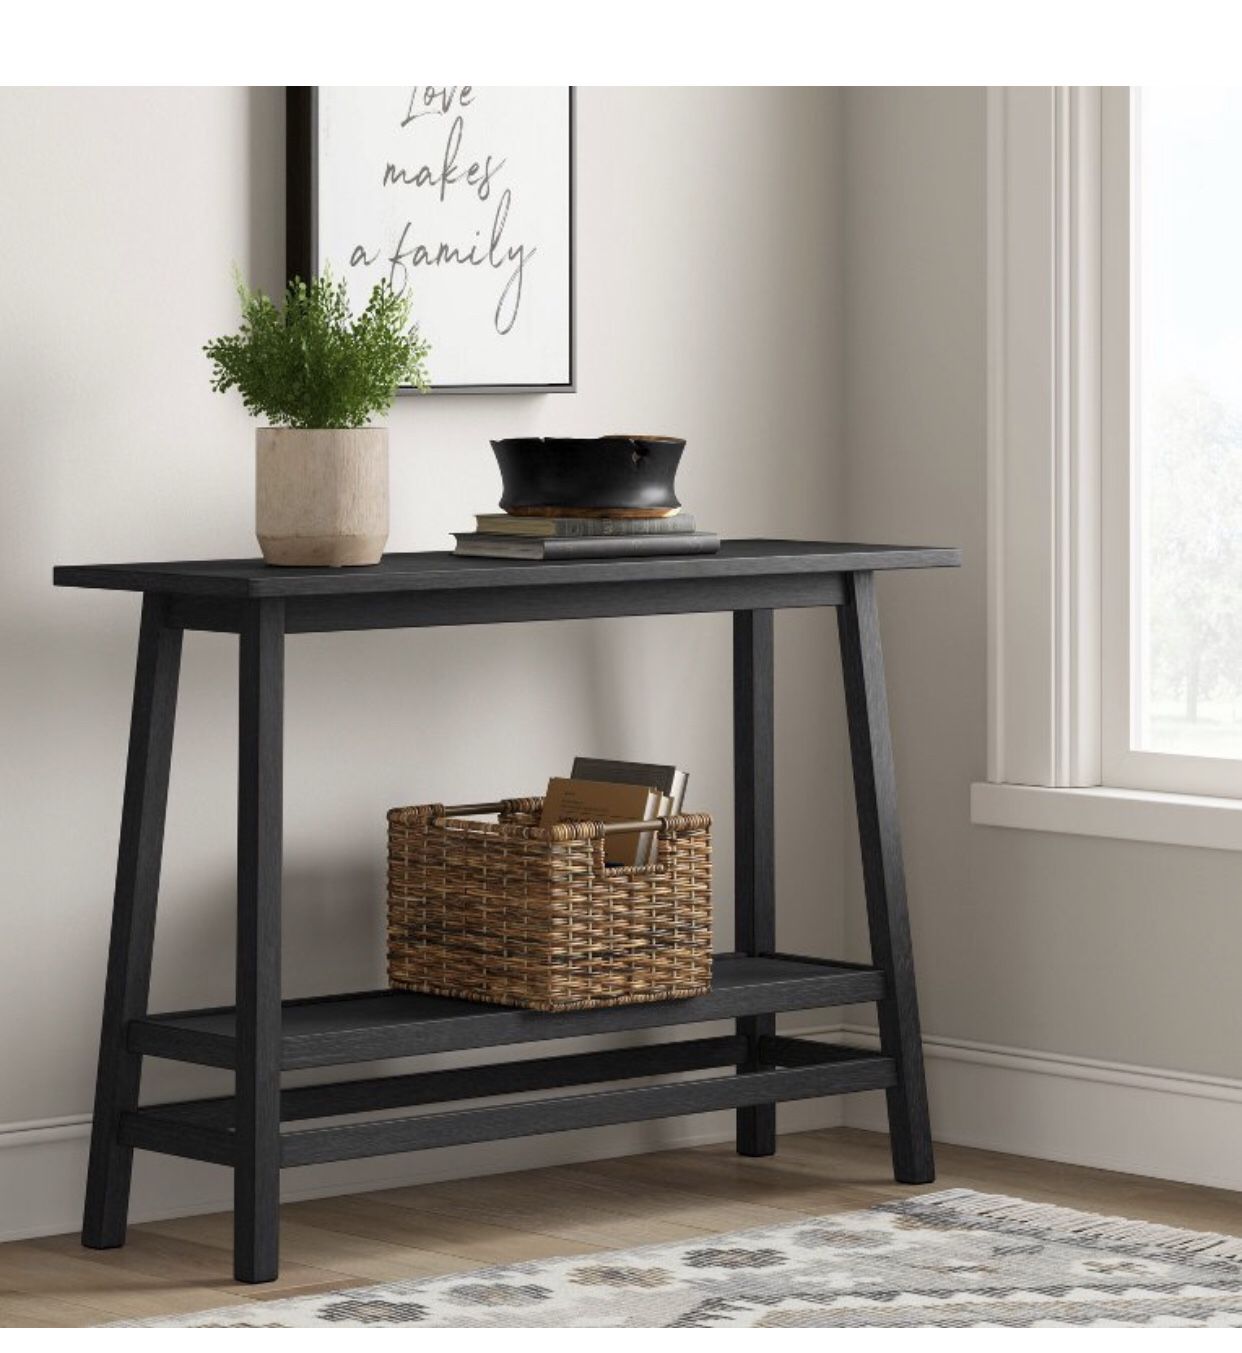 Reclaimed wood console table in black